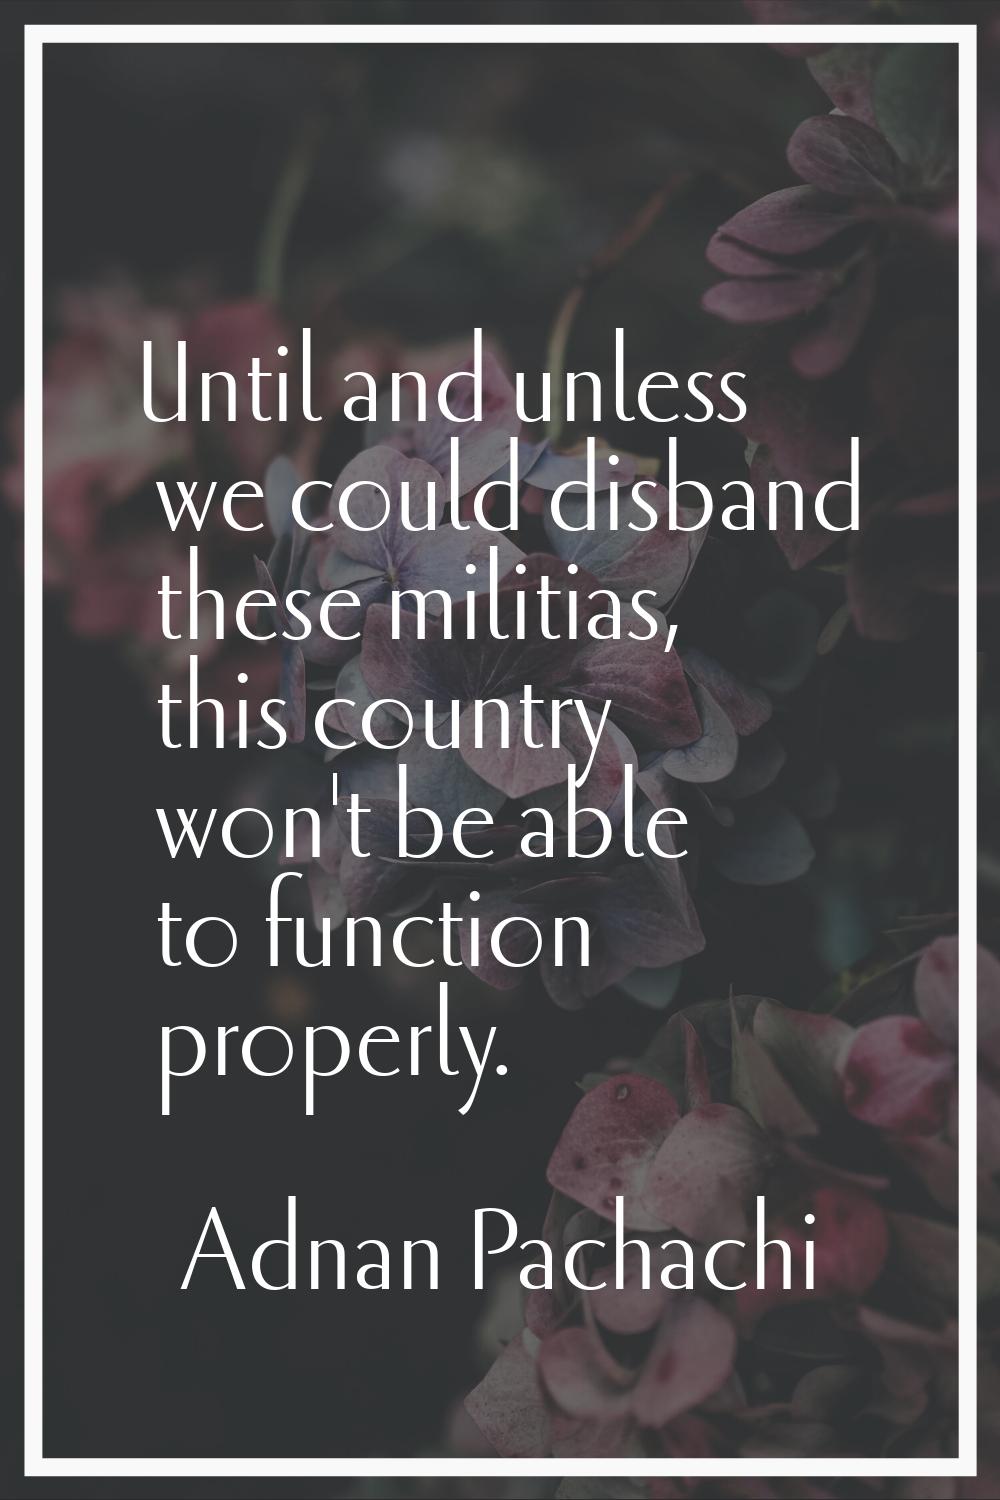 Until and unless we could disband these militias, this country won't be able to function properly.